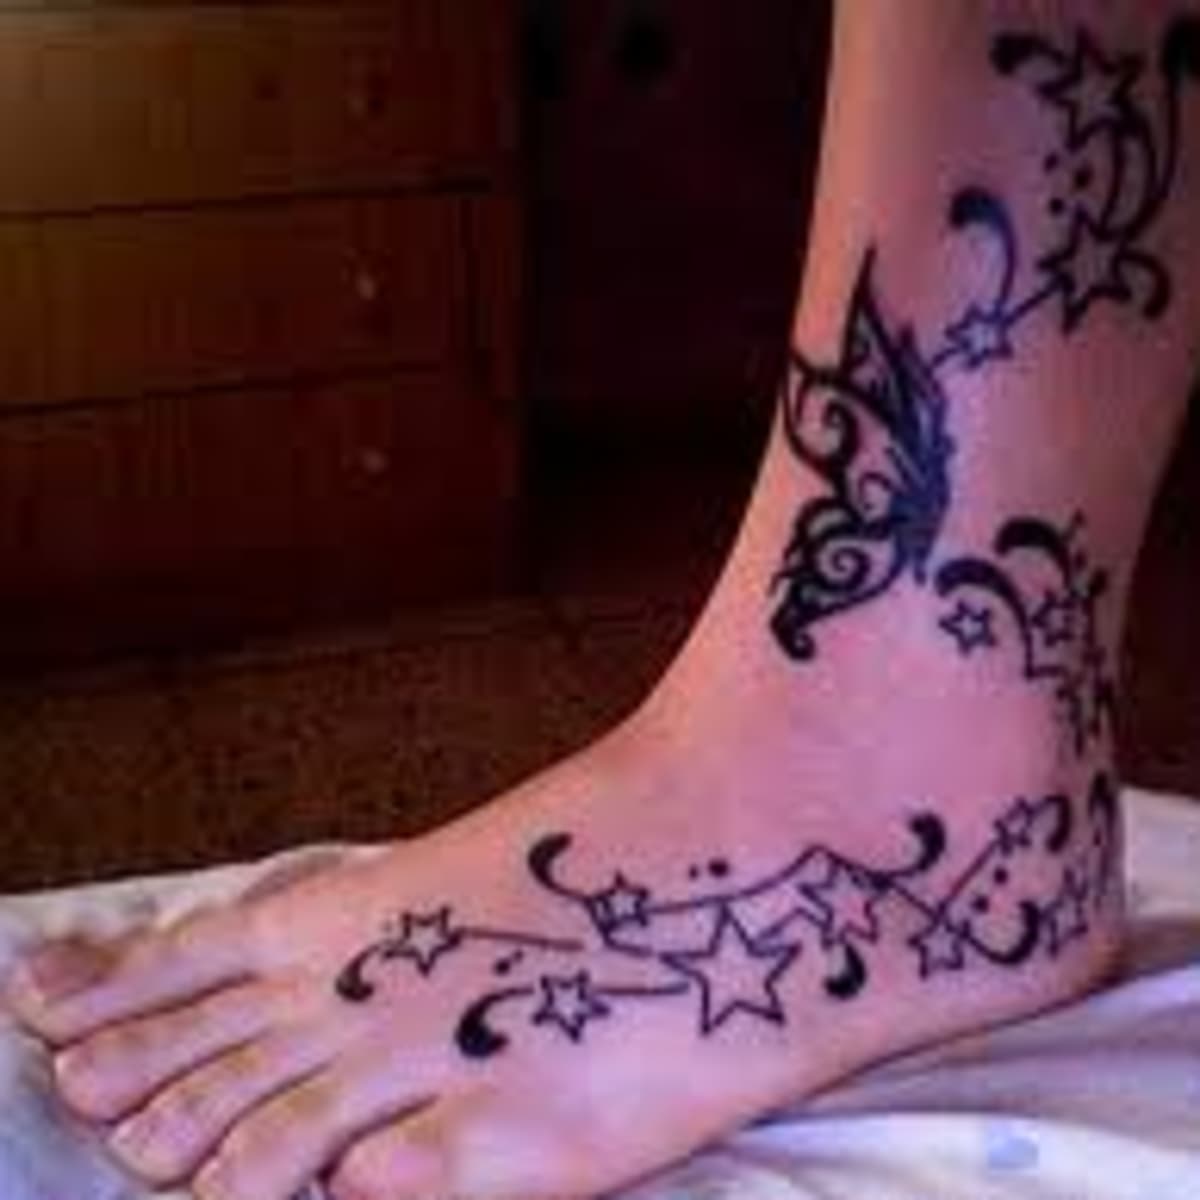 Elegant Foot Tattoo Designs for Women:Amazon.com:Appstore for Android